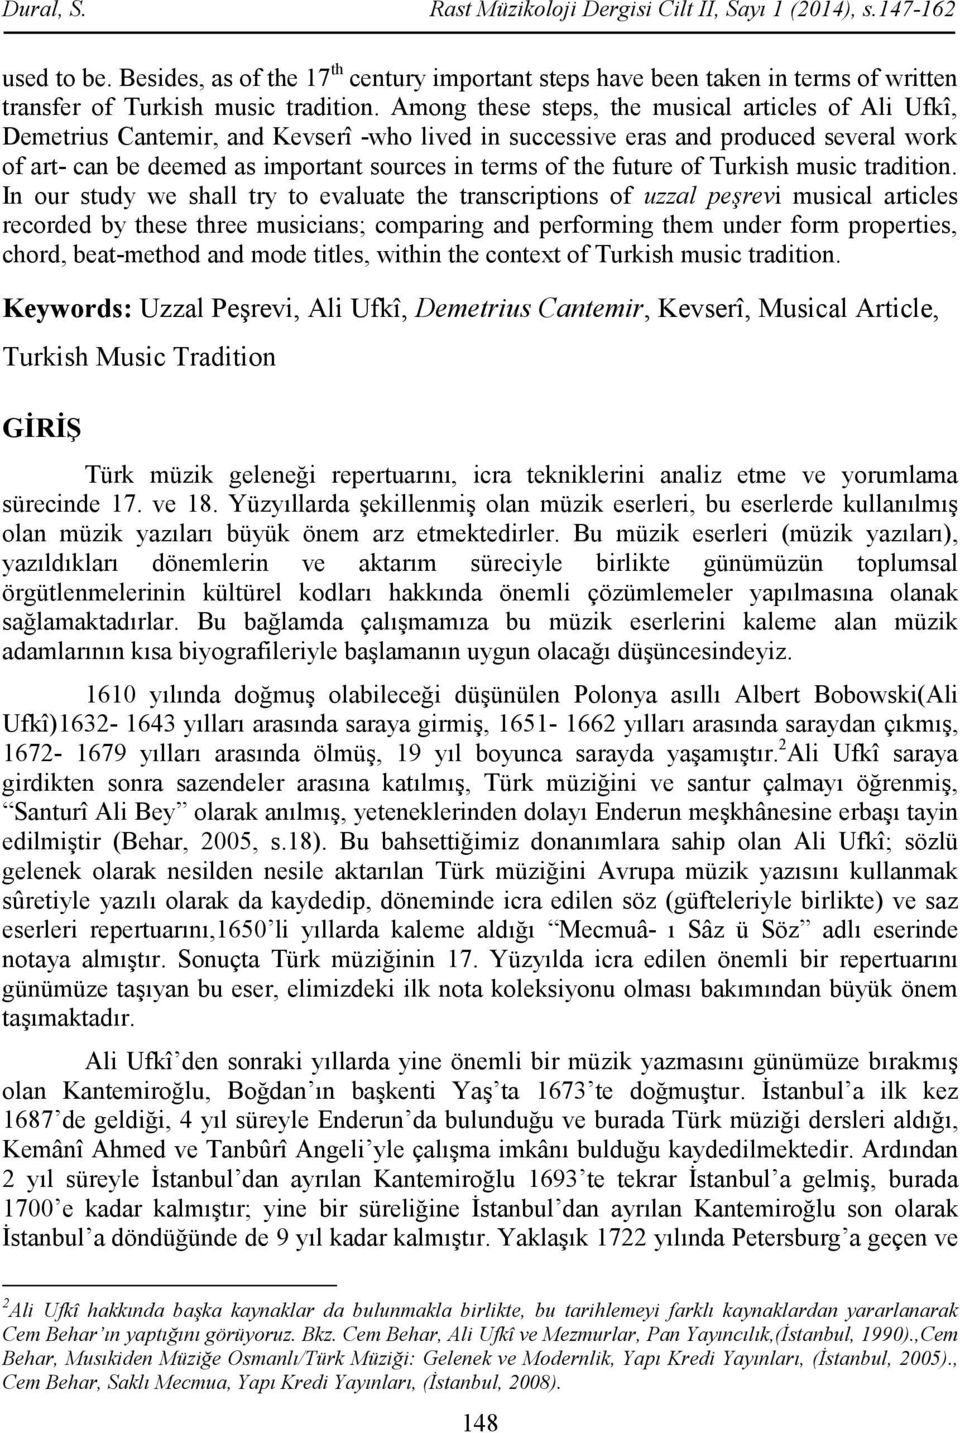 Among these steps, the musical articles of Ali Ufkî, Demetrius Cantemir, and Kevserî -who lived in successive eras and produced several work of art- can be deemed as important sources in terms of the